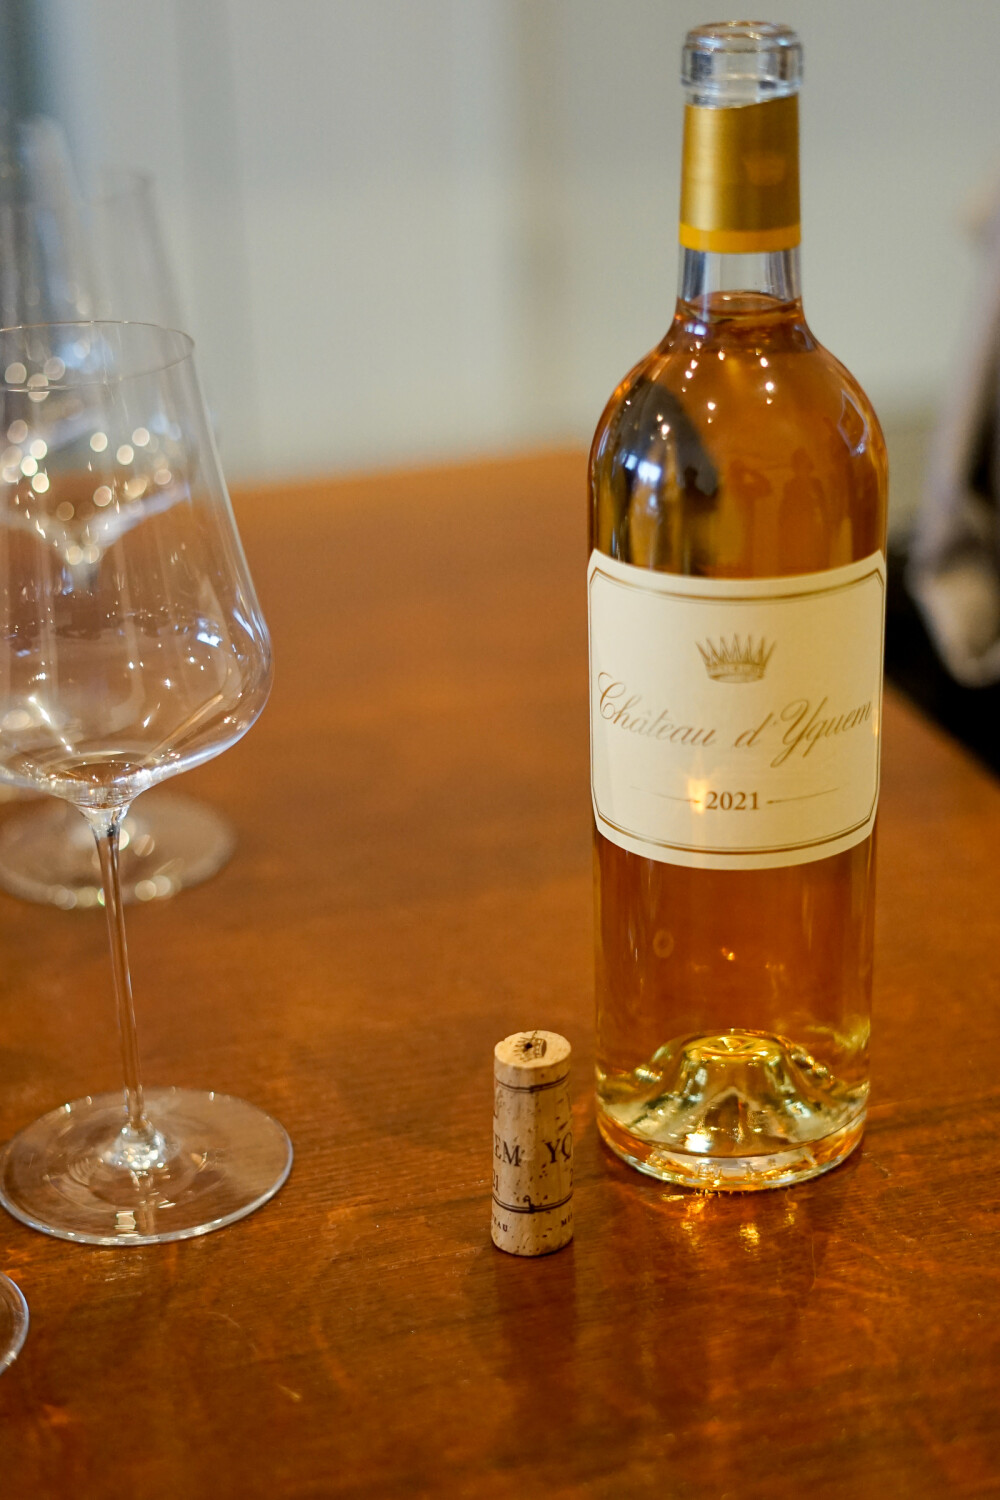 Tasting the new Chateau d'Yquem vintage 2021